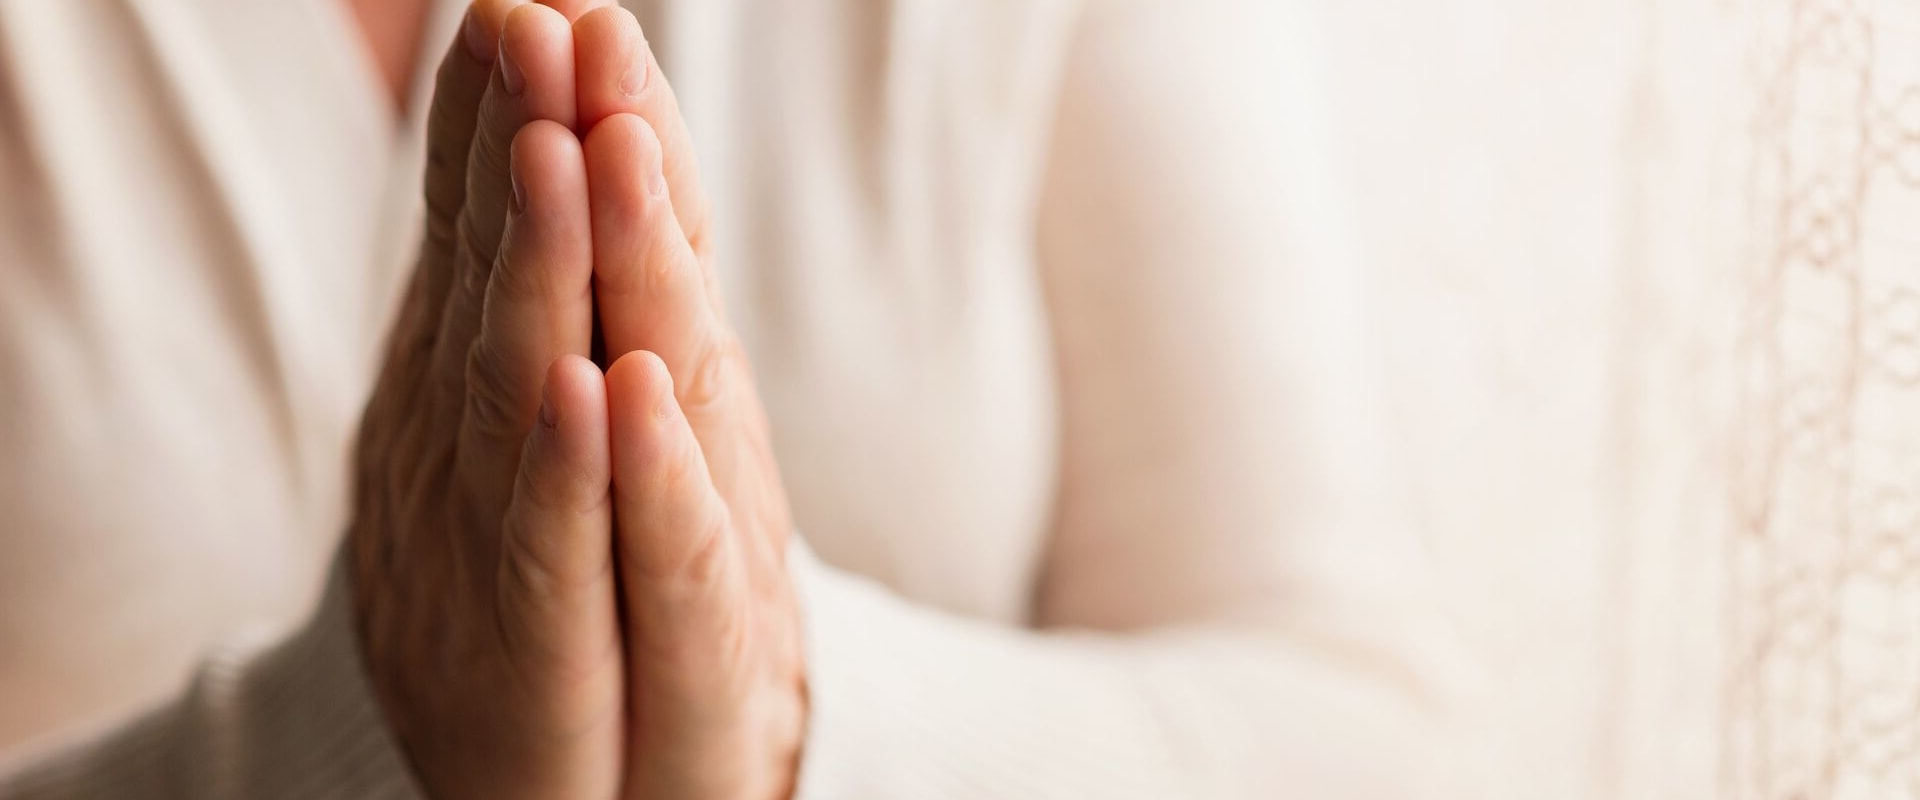 What is considered spiritual wellness?